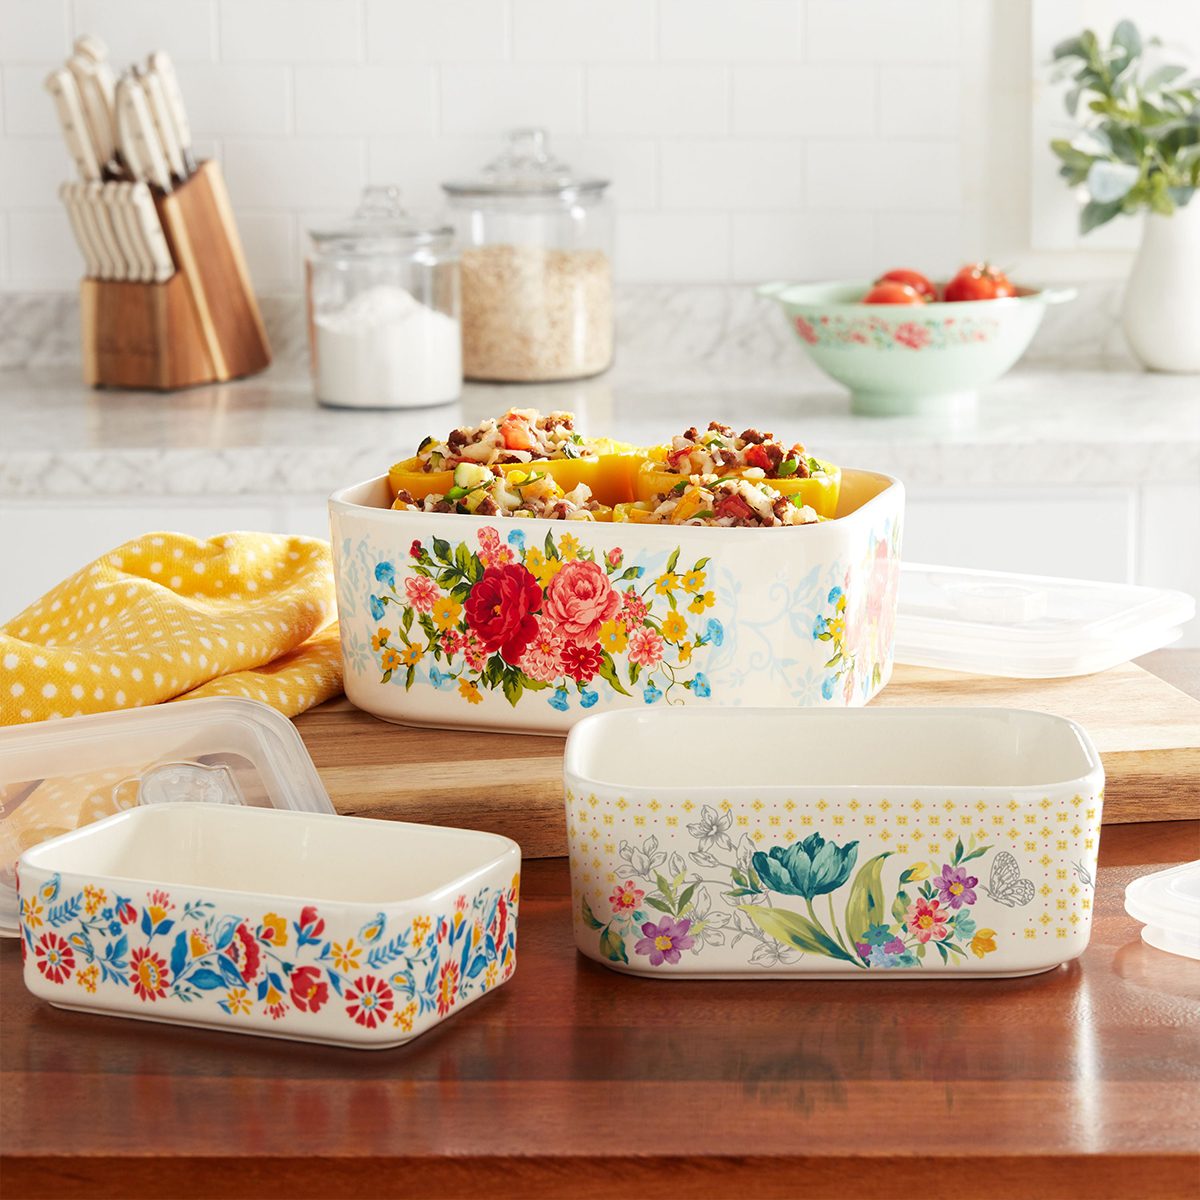 The Pioneer Woman Food Storage at Walmart - Where to Buy Ree Drummond's Storage  Container